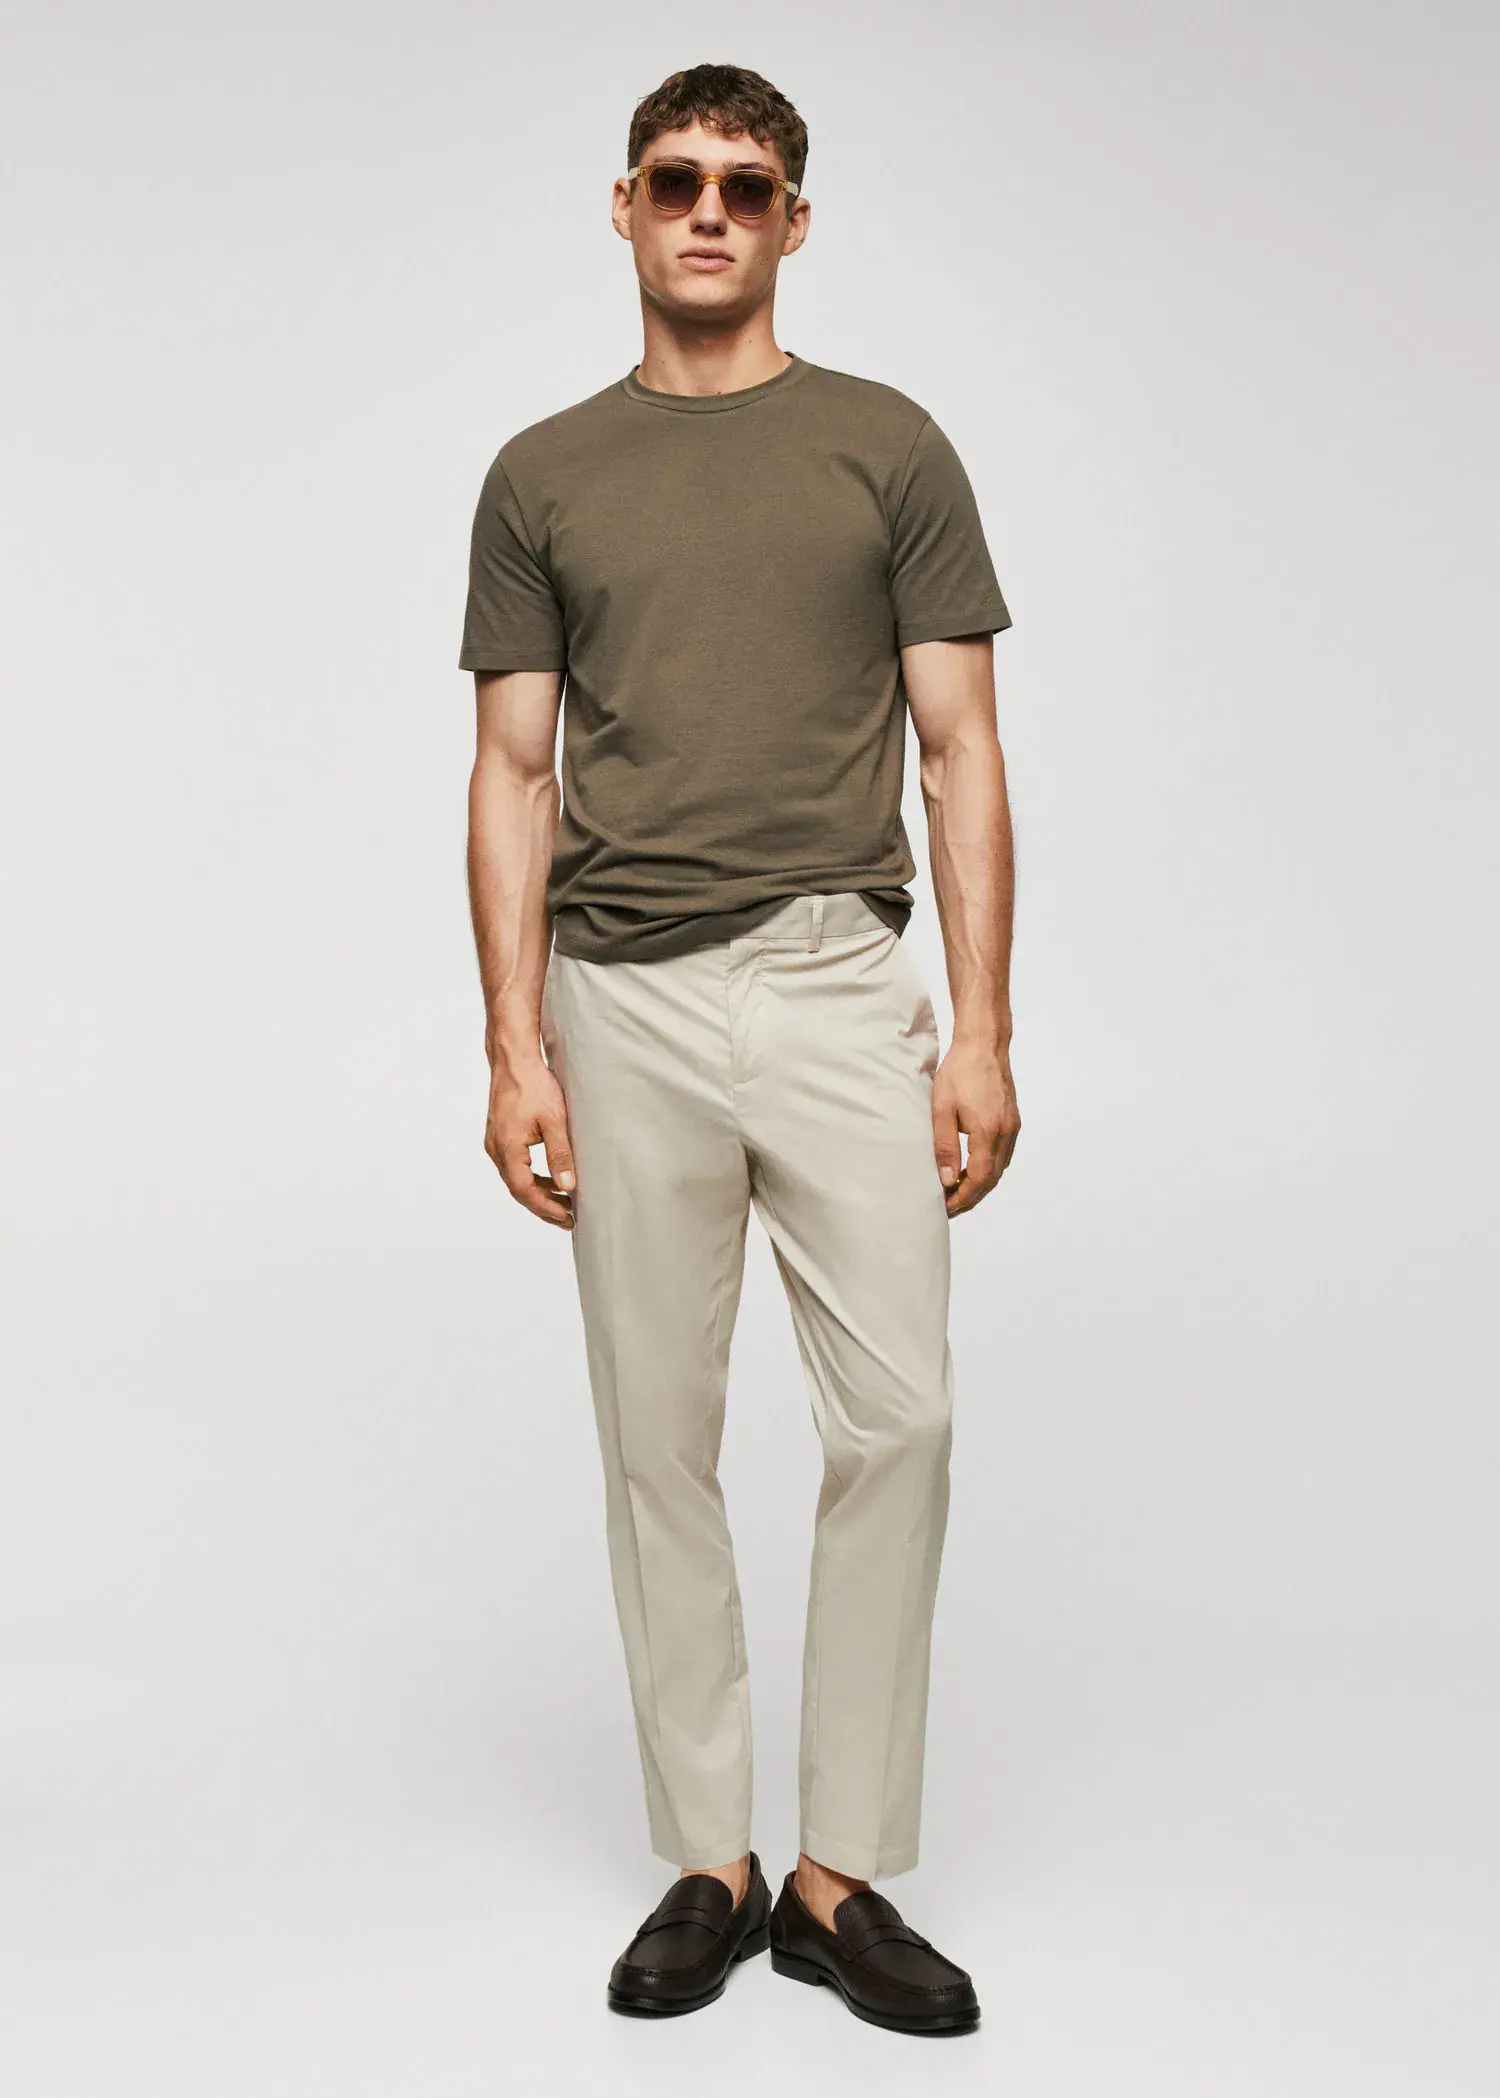 Mango Stretch cotton T-shirt. a man in a brown shirt and beige pants. 